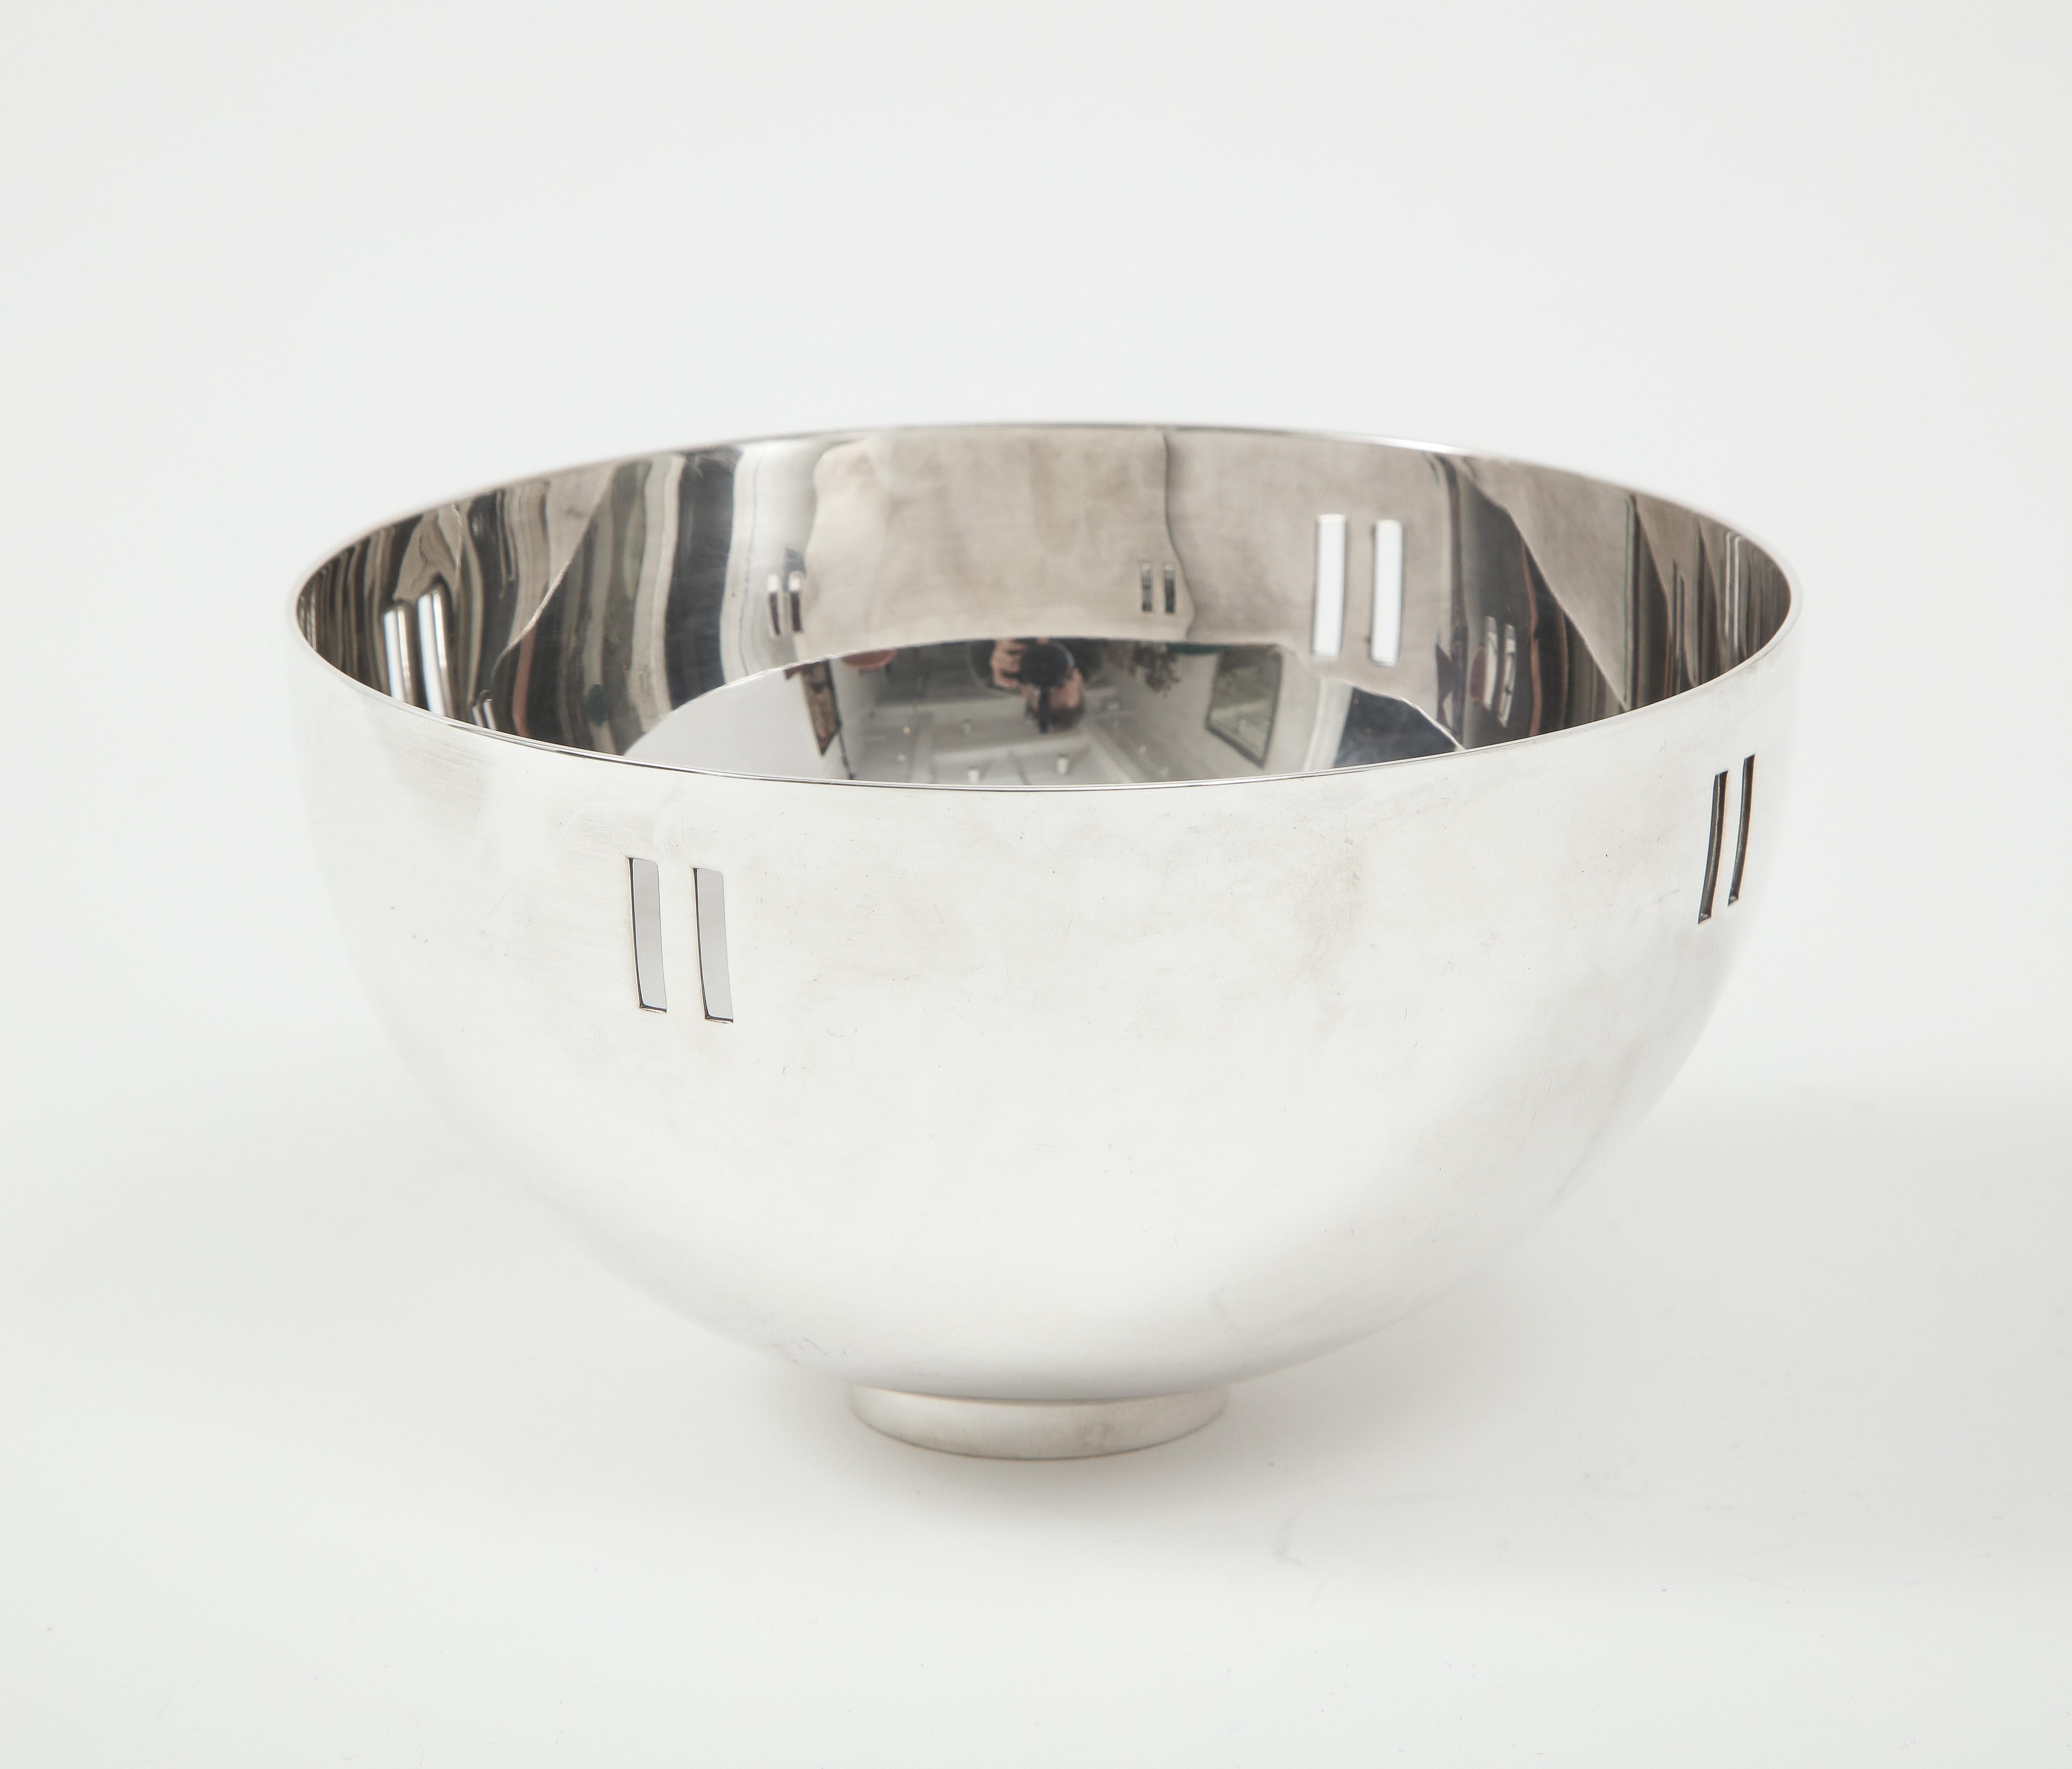 1980s Richard Meier designed for Swid Powell silver-plate decorative bowl, in vintage original condition with some wear and patina, there is some wear to the inside of the bowl.